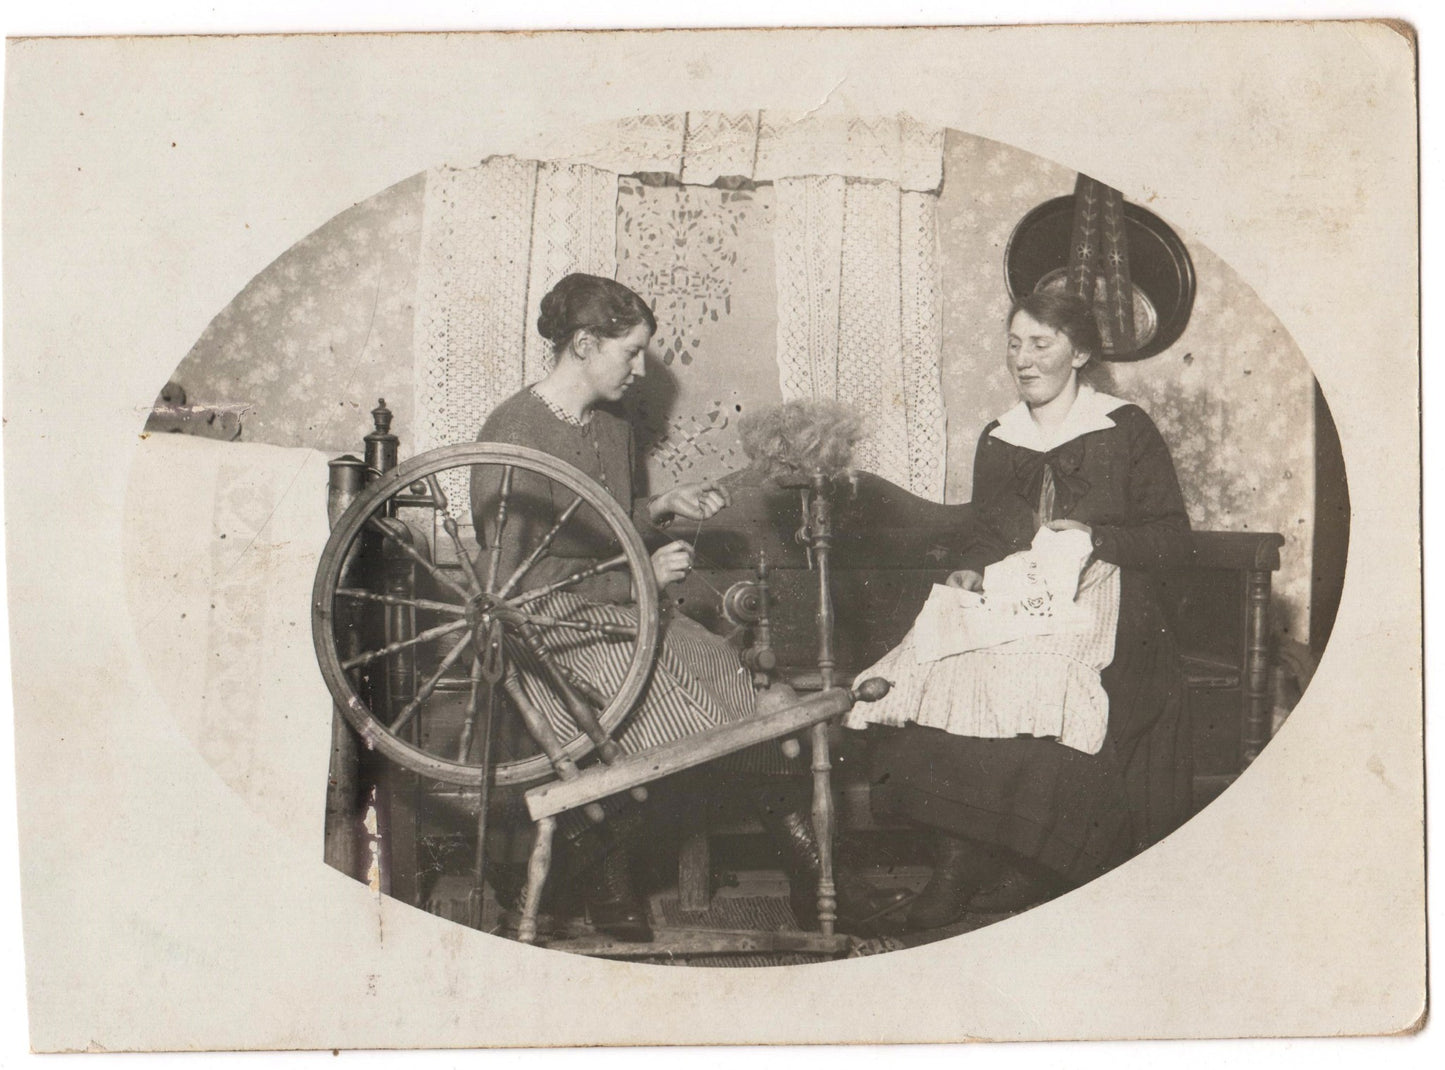 Old Postcard - Handloom - Old Spinning Wheel - Photo of Young Ladies - Spinner